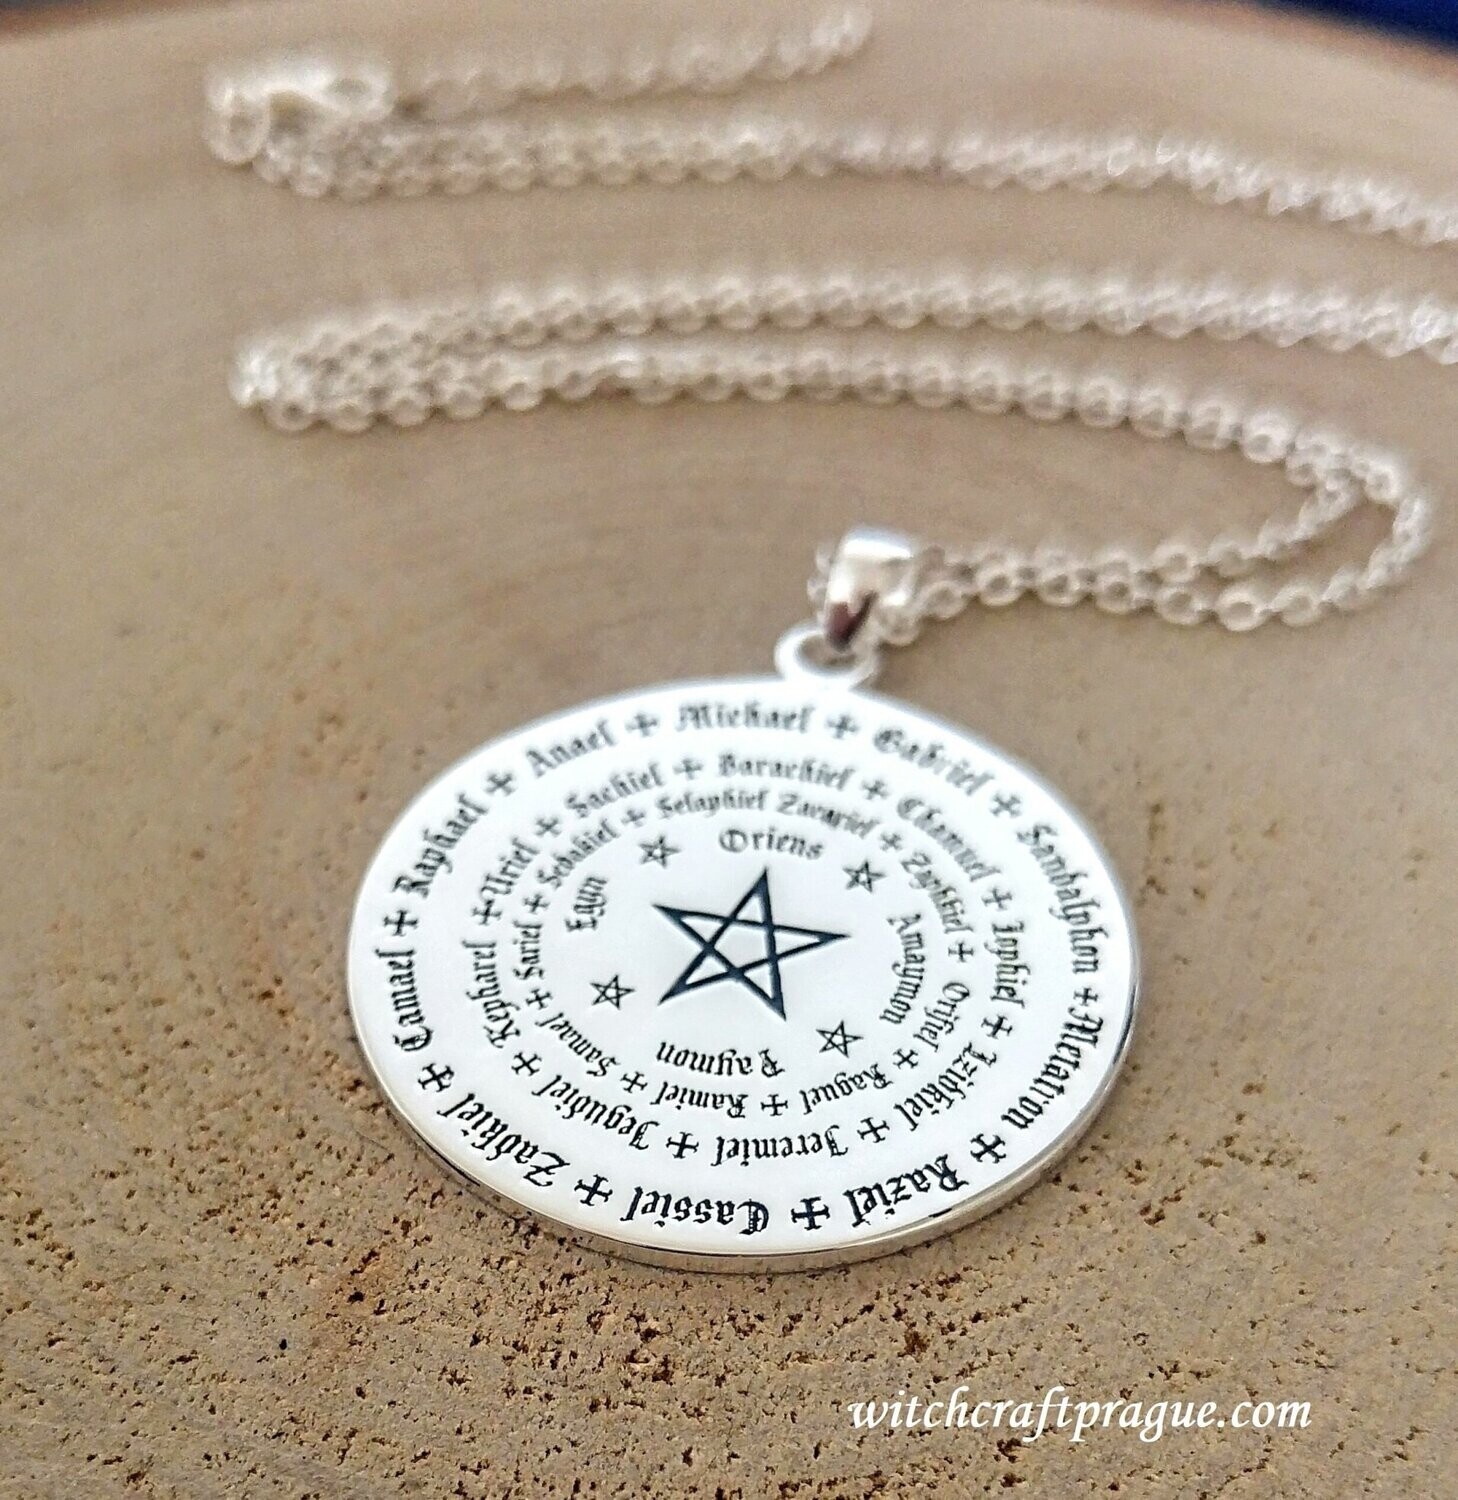 Archangels amulet for protection and success